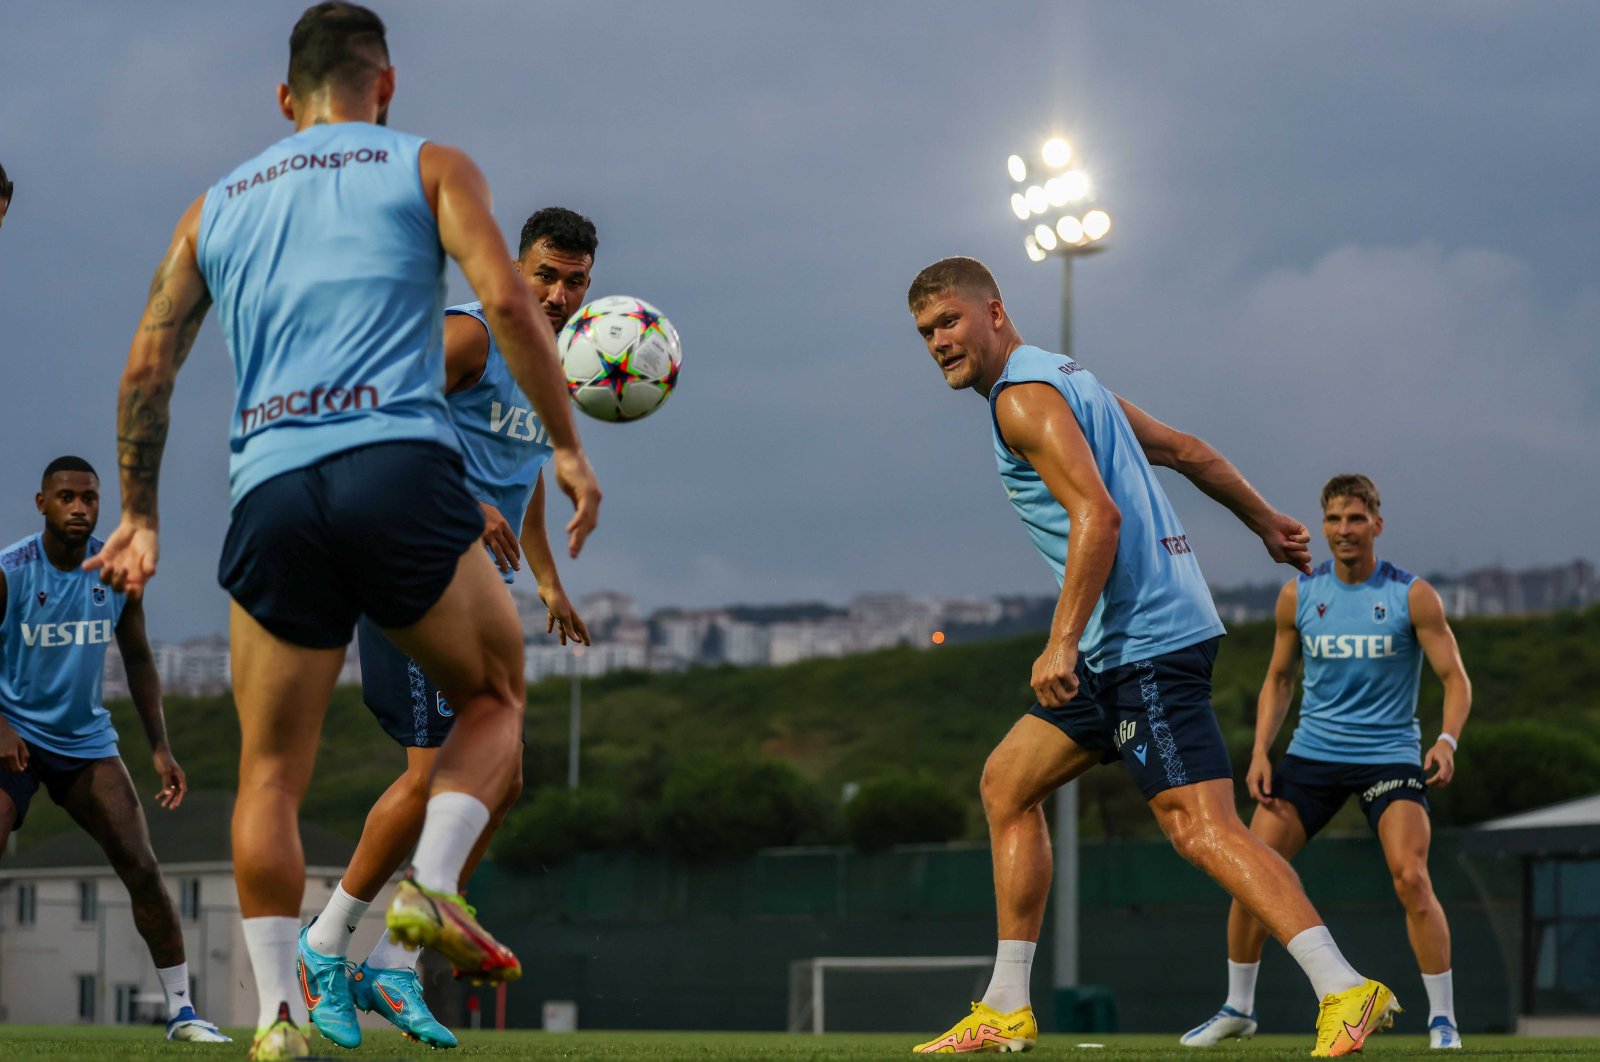 Trabzonspor players train ahead of their UEFA Champions League playoff match against FC Copenhagen, Trabzon, Turkey, Aug. 14, 2022. (AA Photo)